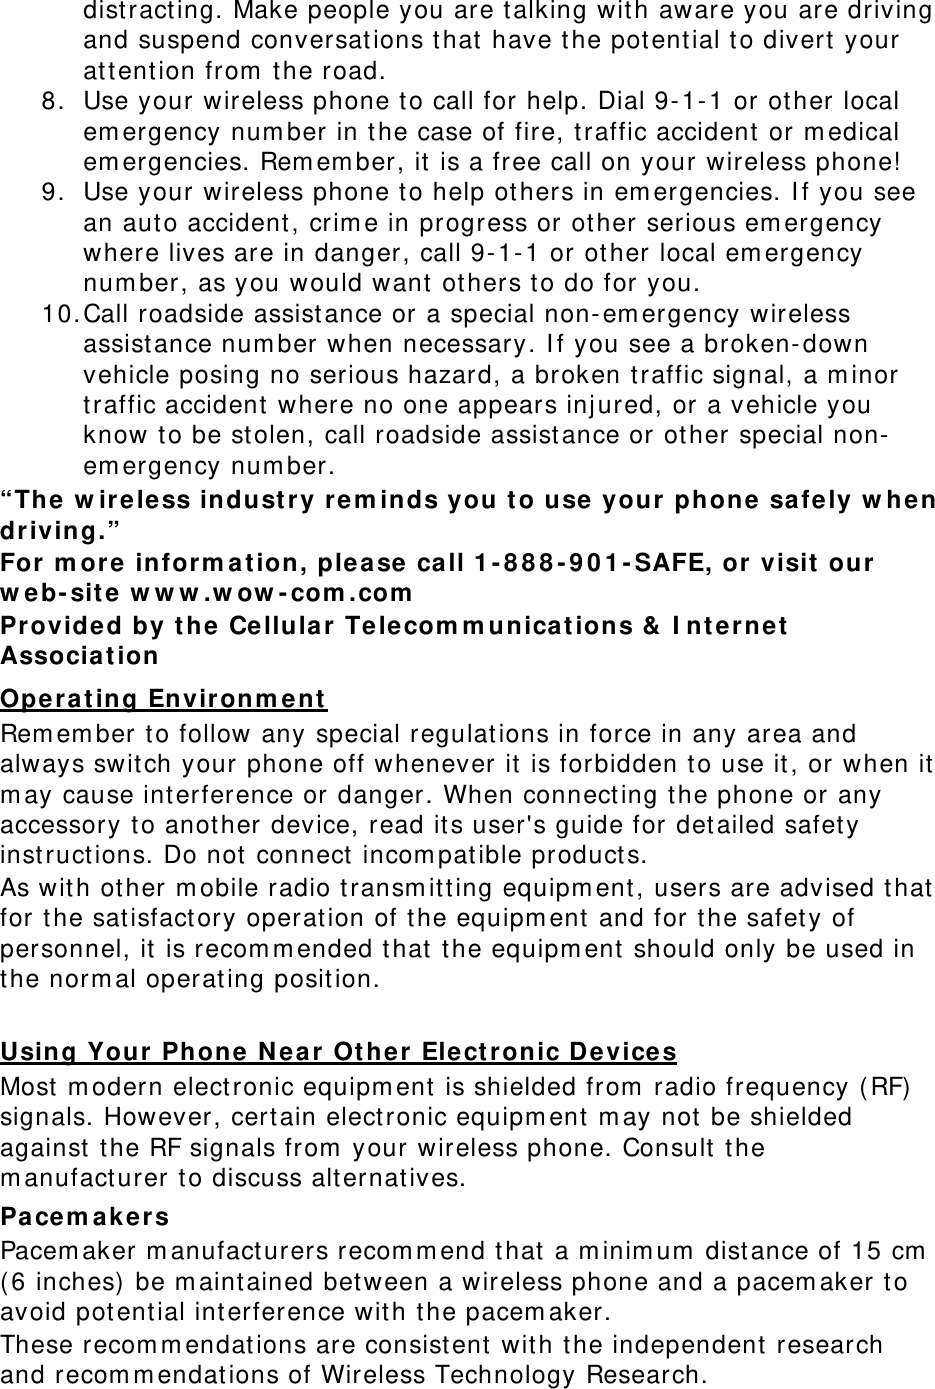 dist ract ing. Make people you are t alking with aware you are driving and suspend conversations t hat  have t he pot ential t o divert your at t ent ion from  t he road. 8. Use your wireless phone t o call for help. Dial 9-1- 1 or ot her local em ergency num ber in t he case of fire, t raffic accident  or m edical em ergencies. Rem em ber, it  is a free call on your wireless phone! 9. Use your wireless phone to help ot hers in em ergencies. I f you see an aut o accident , crim e in progress or ot her serious em ergency where lives are in danger, call 9- 1- 1 or other local em ergency num ber, as you would want  ot hers t o do for you. 10. Call roadside assist ance or a special non- em ergency wireless assistance num ber when necessary. I f you see a broken- down vehicle posing no serious hazard, a broken t raffic signal, a m inor traffic accident  where no one appears inj ured, or a vehicle you know to be st olen, call roadside assist ance or other special non-em ergency num ber. “The w ireless indust ry rem inds you t o use  your ph one sa fely w hen dr iving.” For  m ore inform at ion, ple a se ca ll 1 - 8 8 8 - 9 0 1 - SAFE, or visit  our w eb- sit e w w w .w ow - com .com  Pr ovided by t he Cellula r  Telecom m unica t ions &amp;  I nt e r net  Associa t ion  Ope r a t ing Environm ent Rem em ber t o follow any special regulat ions in force in any area and always swit ch your phone off whenever it  is forbidden t o use it, or w hen it  m ay cause int erference or danger. When connecting t he phone or any accessory t o another device, read it s user&apos;s guide for detailed safet y instruct ions. Do not  connect  incom pat ible product s. As with ot her m obile radio t ransm it t ing equipm ent , users are advised t hat  for t he sat isfact ory operation of t he equipm ent  and for t he safety of personnel, it  is recom m ended t hat t he equipm ent  should only be used in the norm al operat ing posit ion. Using Your Phone N ear Ot her Elect ronic Device s Most  m odern elect ronic equipm ent is shielded from  radio frequency ( RF)  signals. However, cert ain elect ronic equipm ent  m ay not  be shielded against  t he RF signals from  your wireless phone. Consult  the m anufact urer to discuss alt ernatives. Pa cem akers Pacem aker m anufacturers recom m end t hat  a m inim um  distance of 15 cm  ( 6 inches) be m aintained between a wireless phone and a pacem aker to avoid potential int erference wit h t he pacem aker. These recom m endations are consistent with t he independent  research and recom m endations of Wireless Technology Research. 